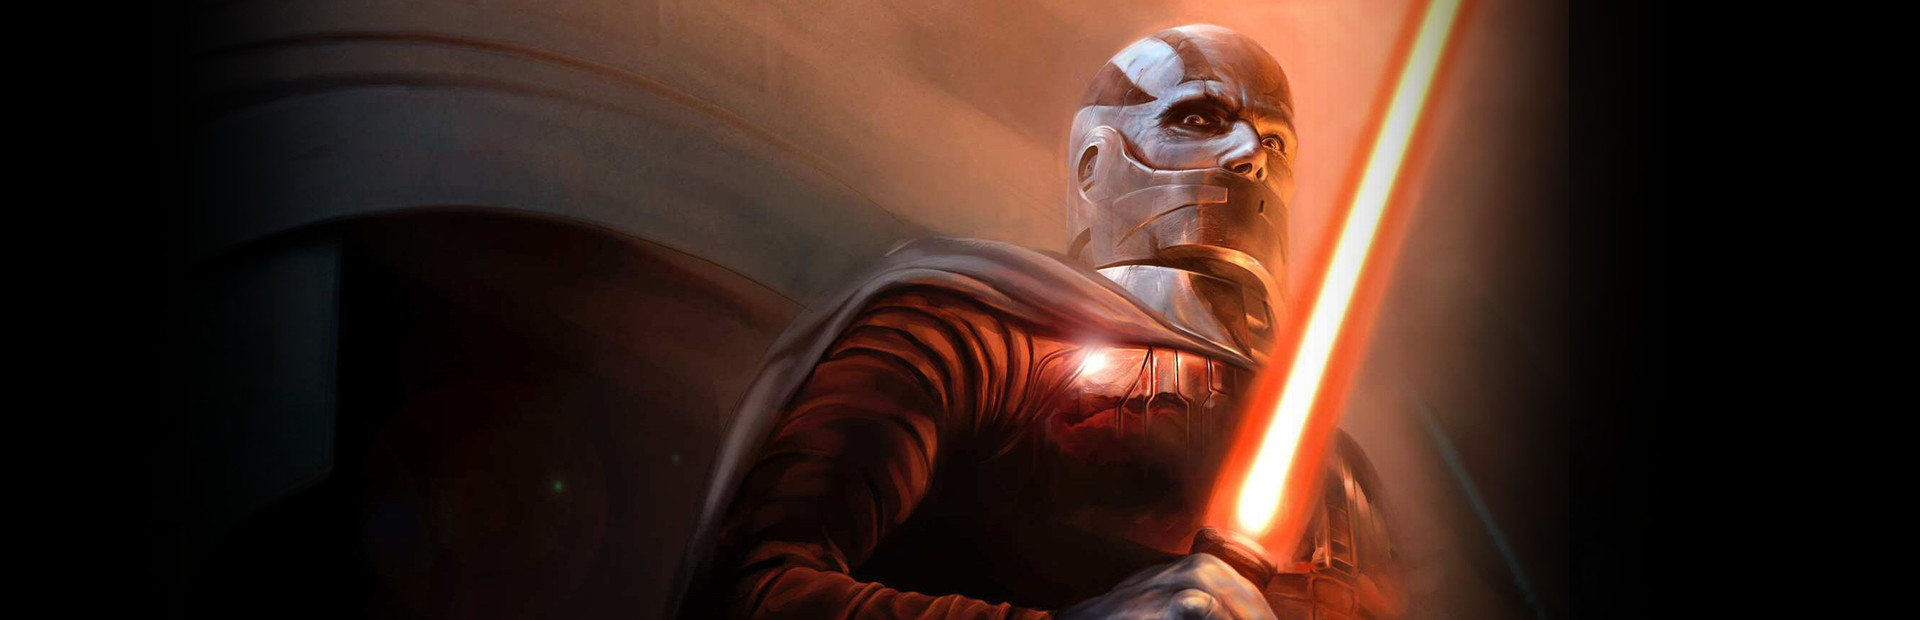 STAR WARS™ Knights of the Old Republic™ cover image